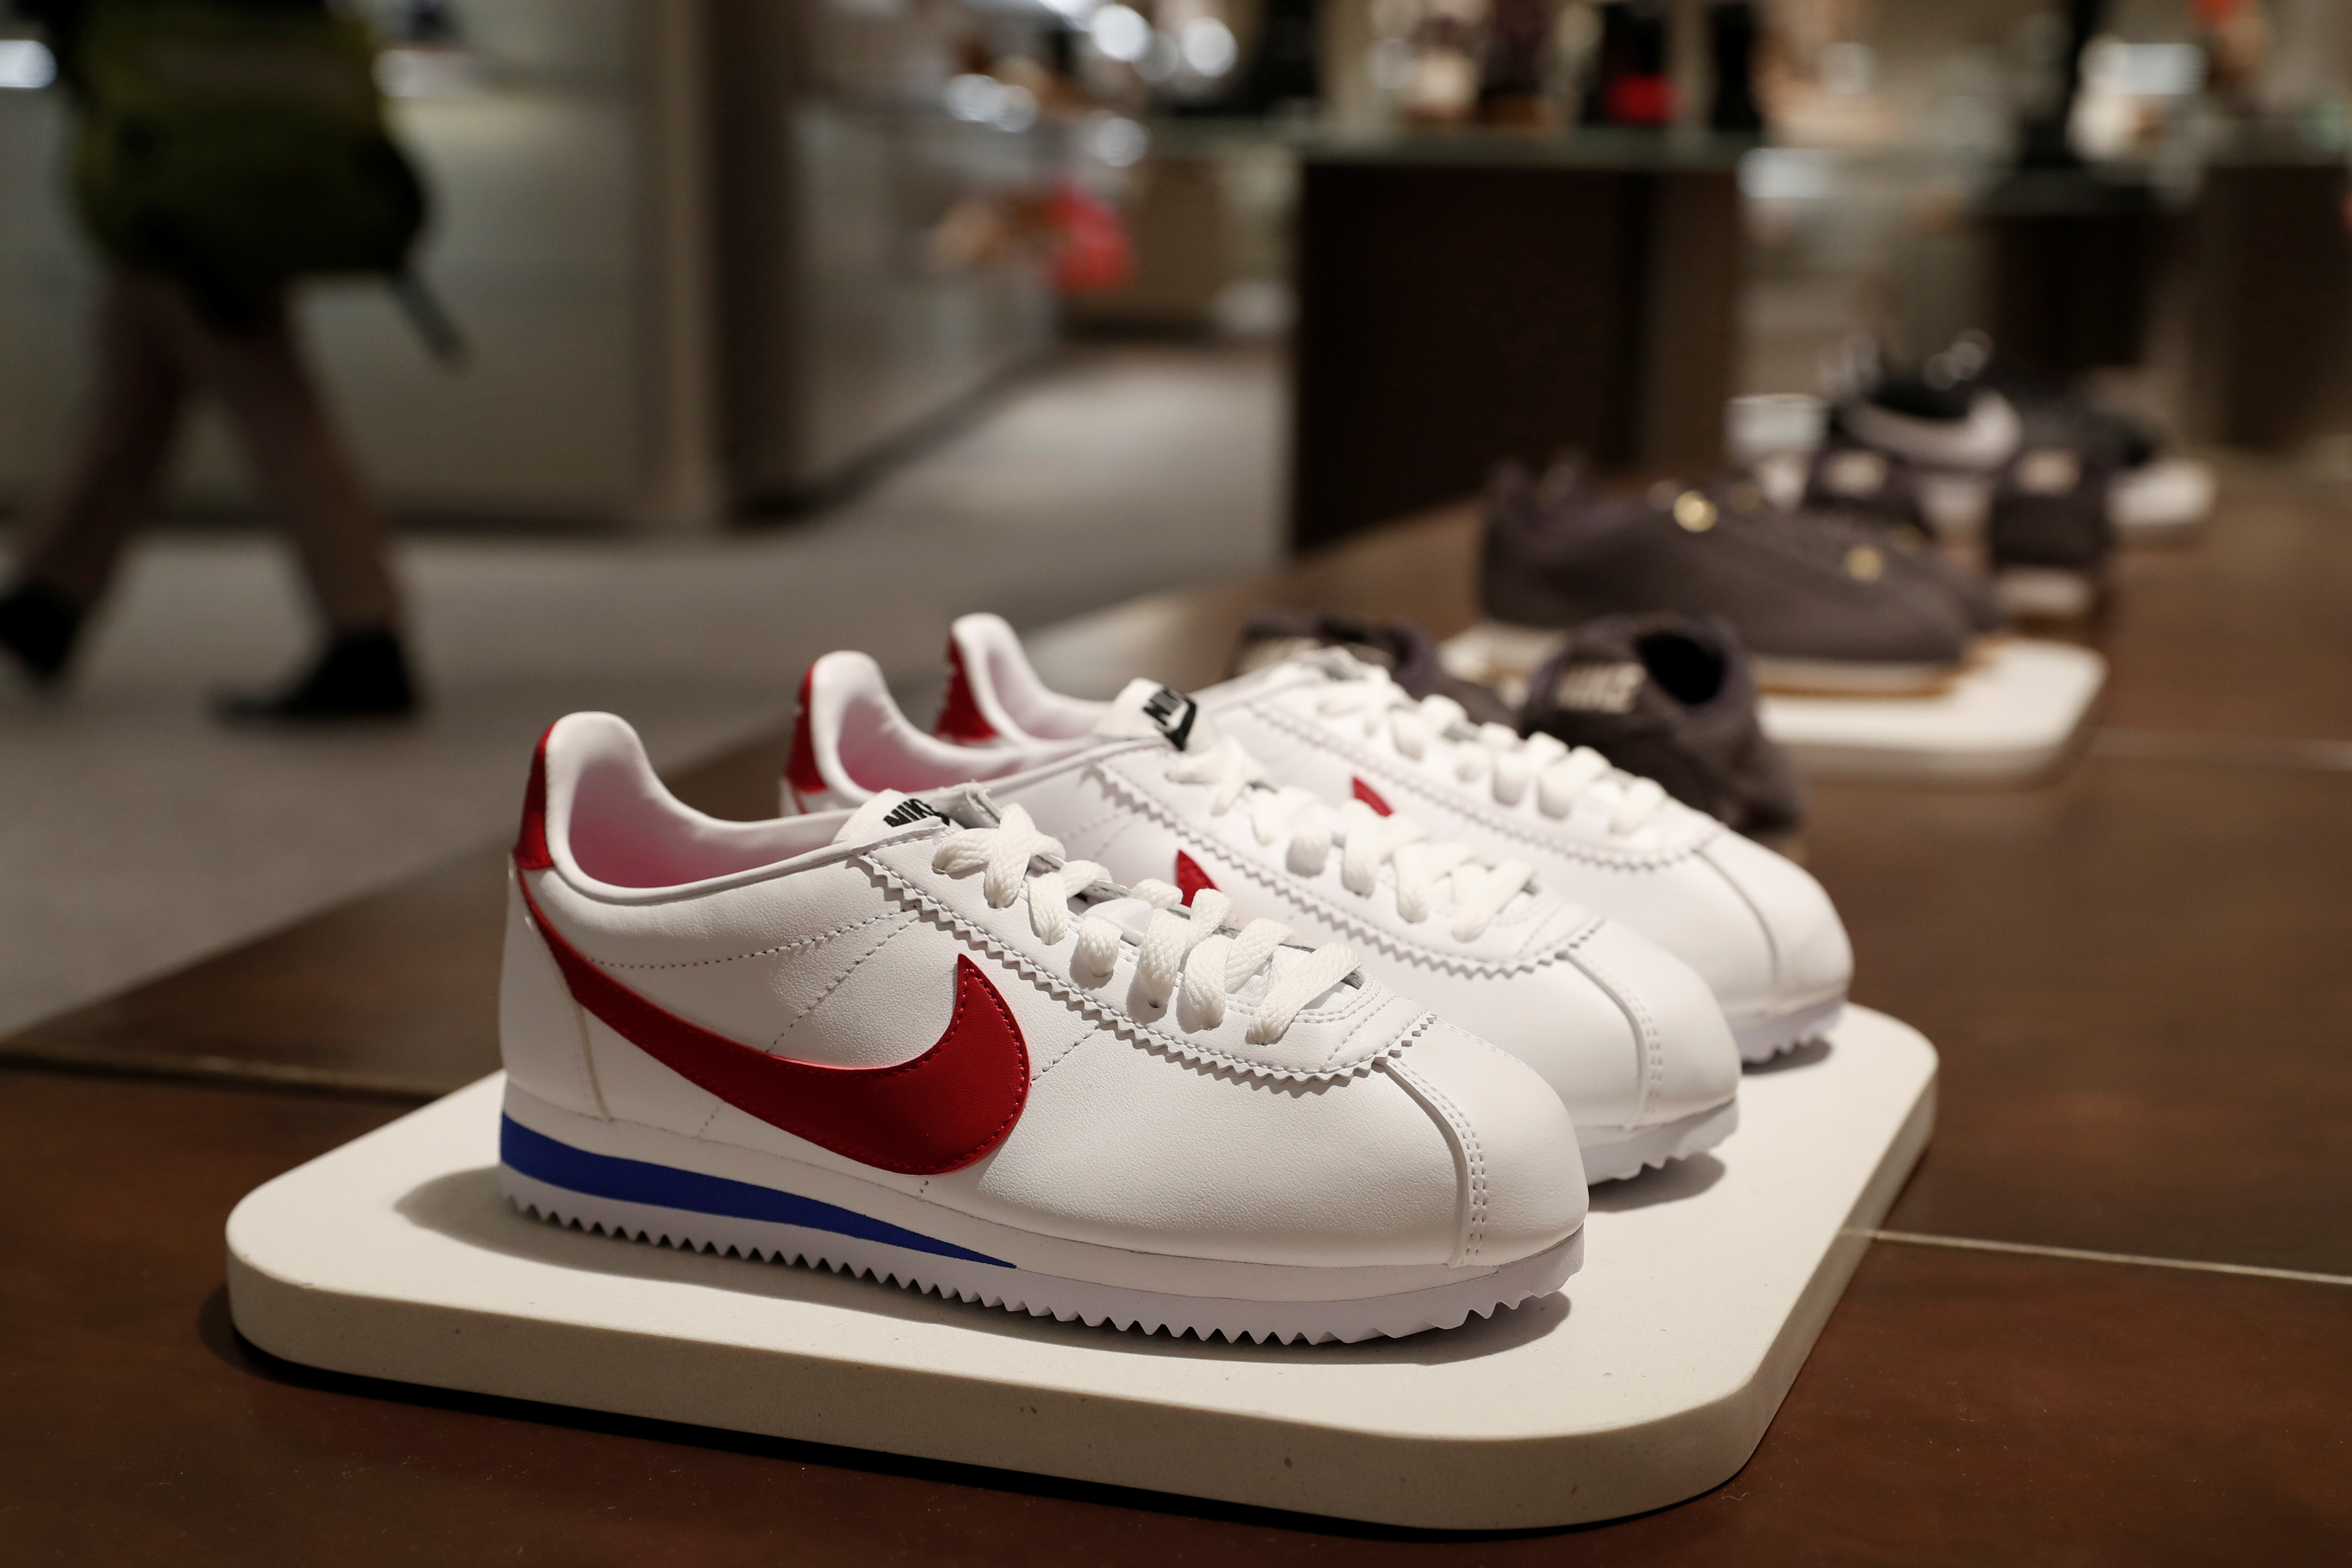 Nike shoes are seen on display at the Nordstrom flagship store during a media preview in New York